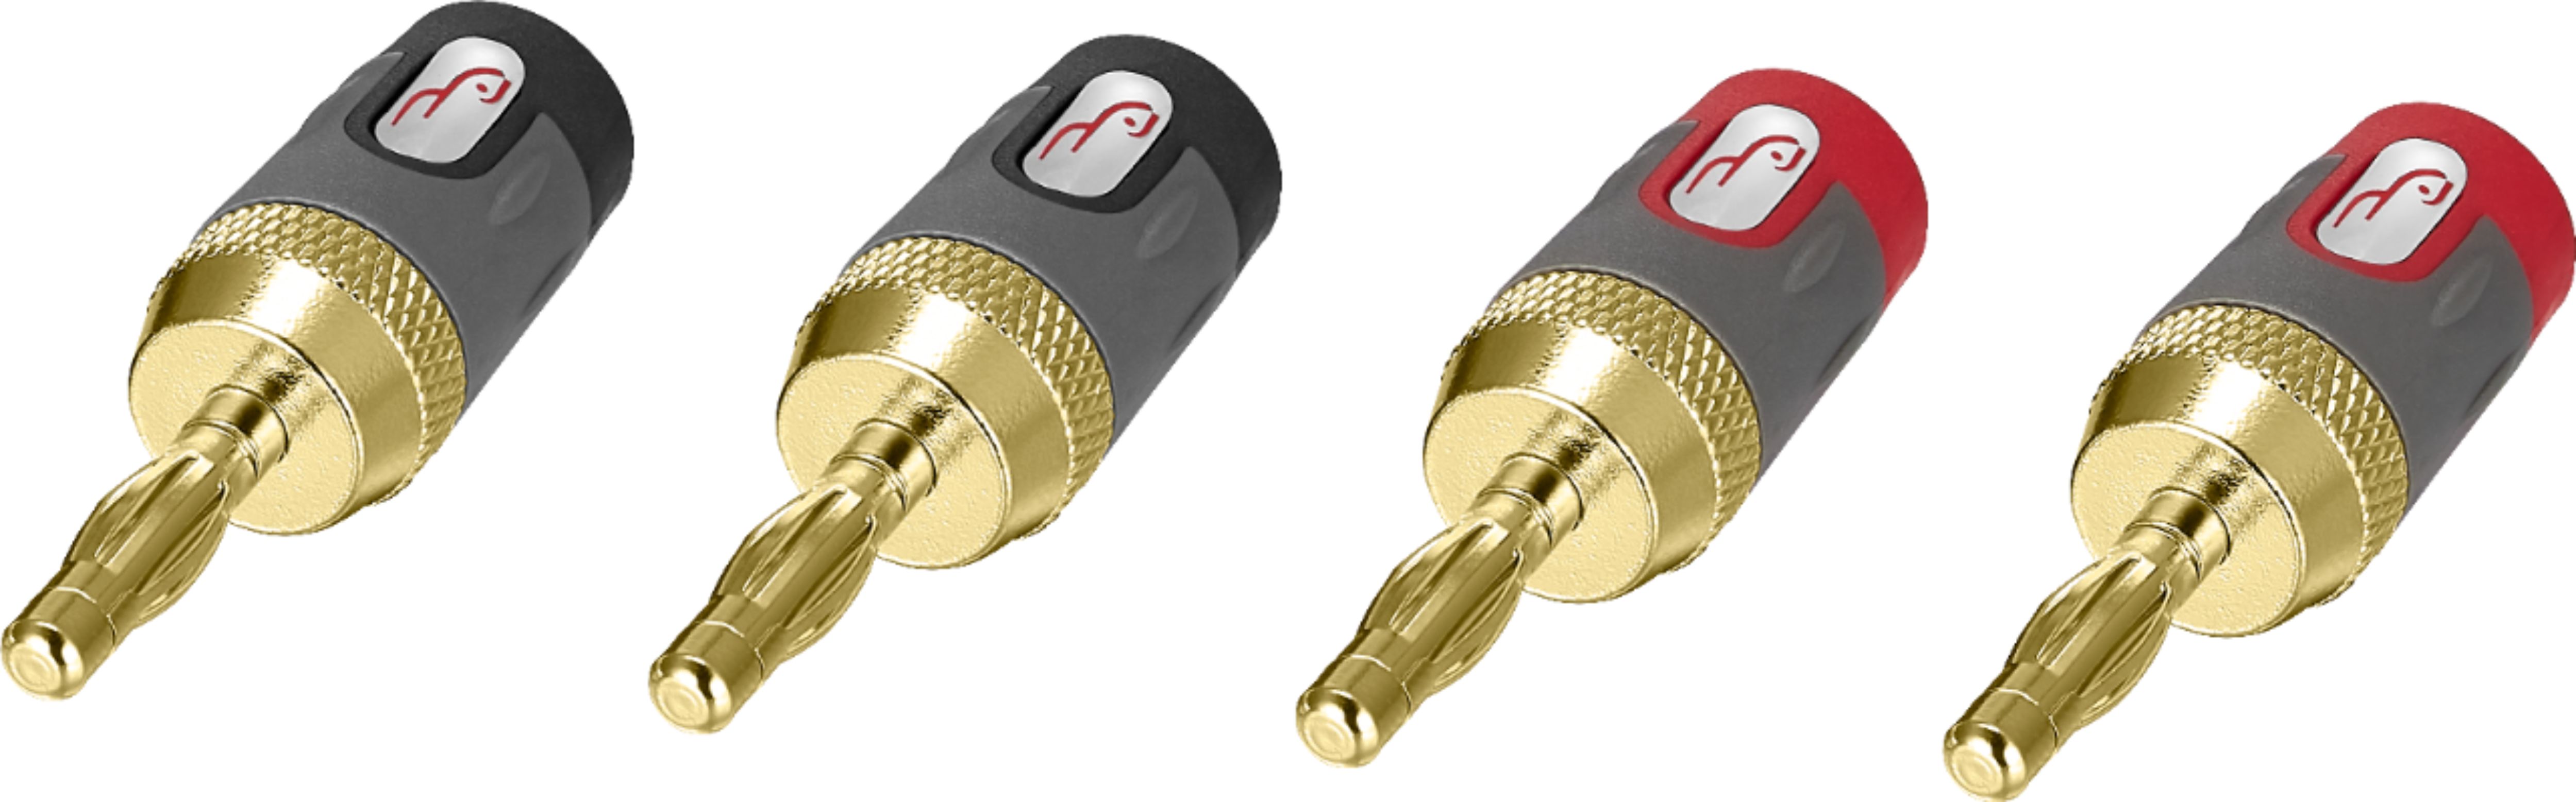 Angle View: Rocketfish™ - 24k Gold Plated Toolless Speaker Banana Plugs (4 Pack) - Red/Black